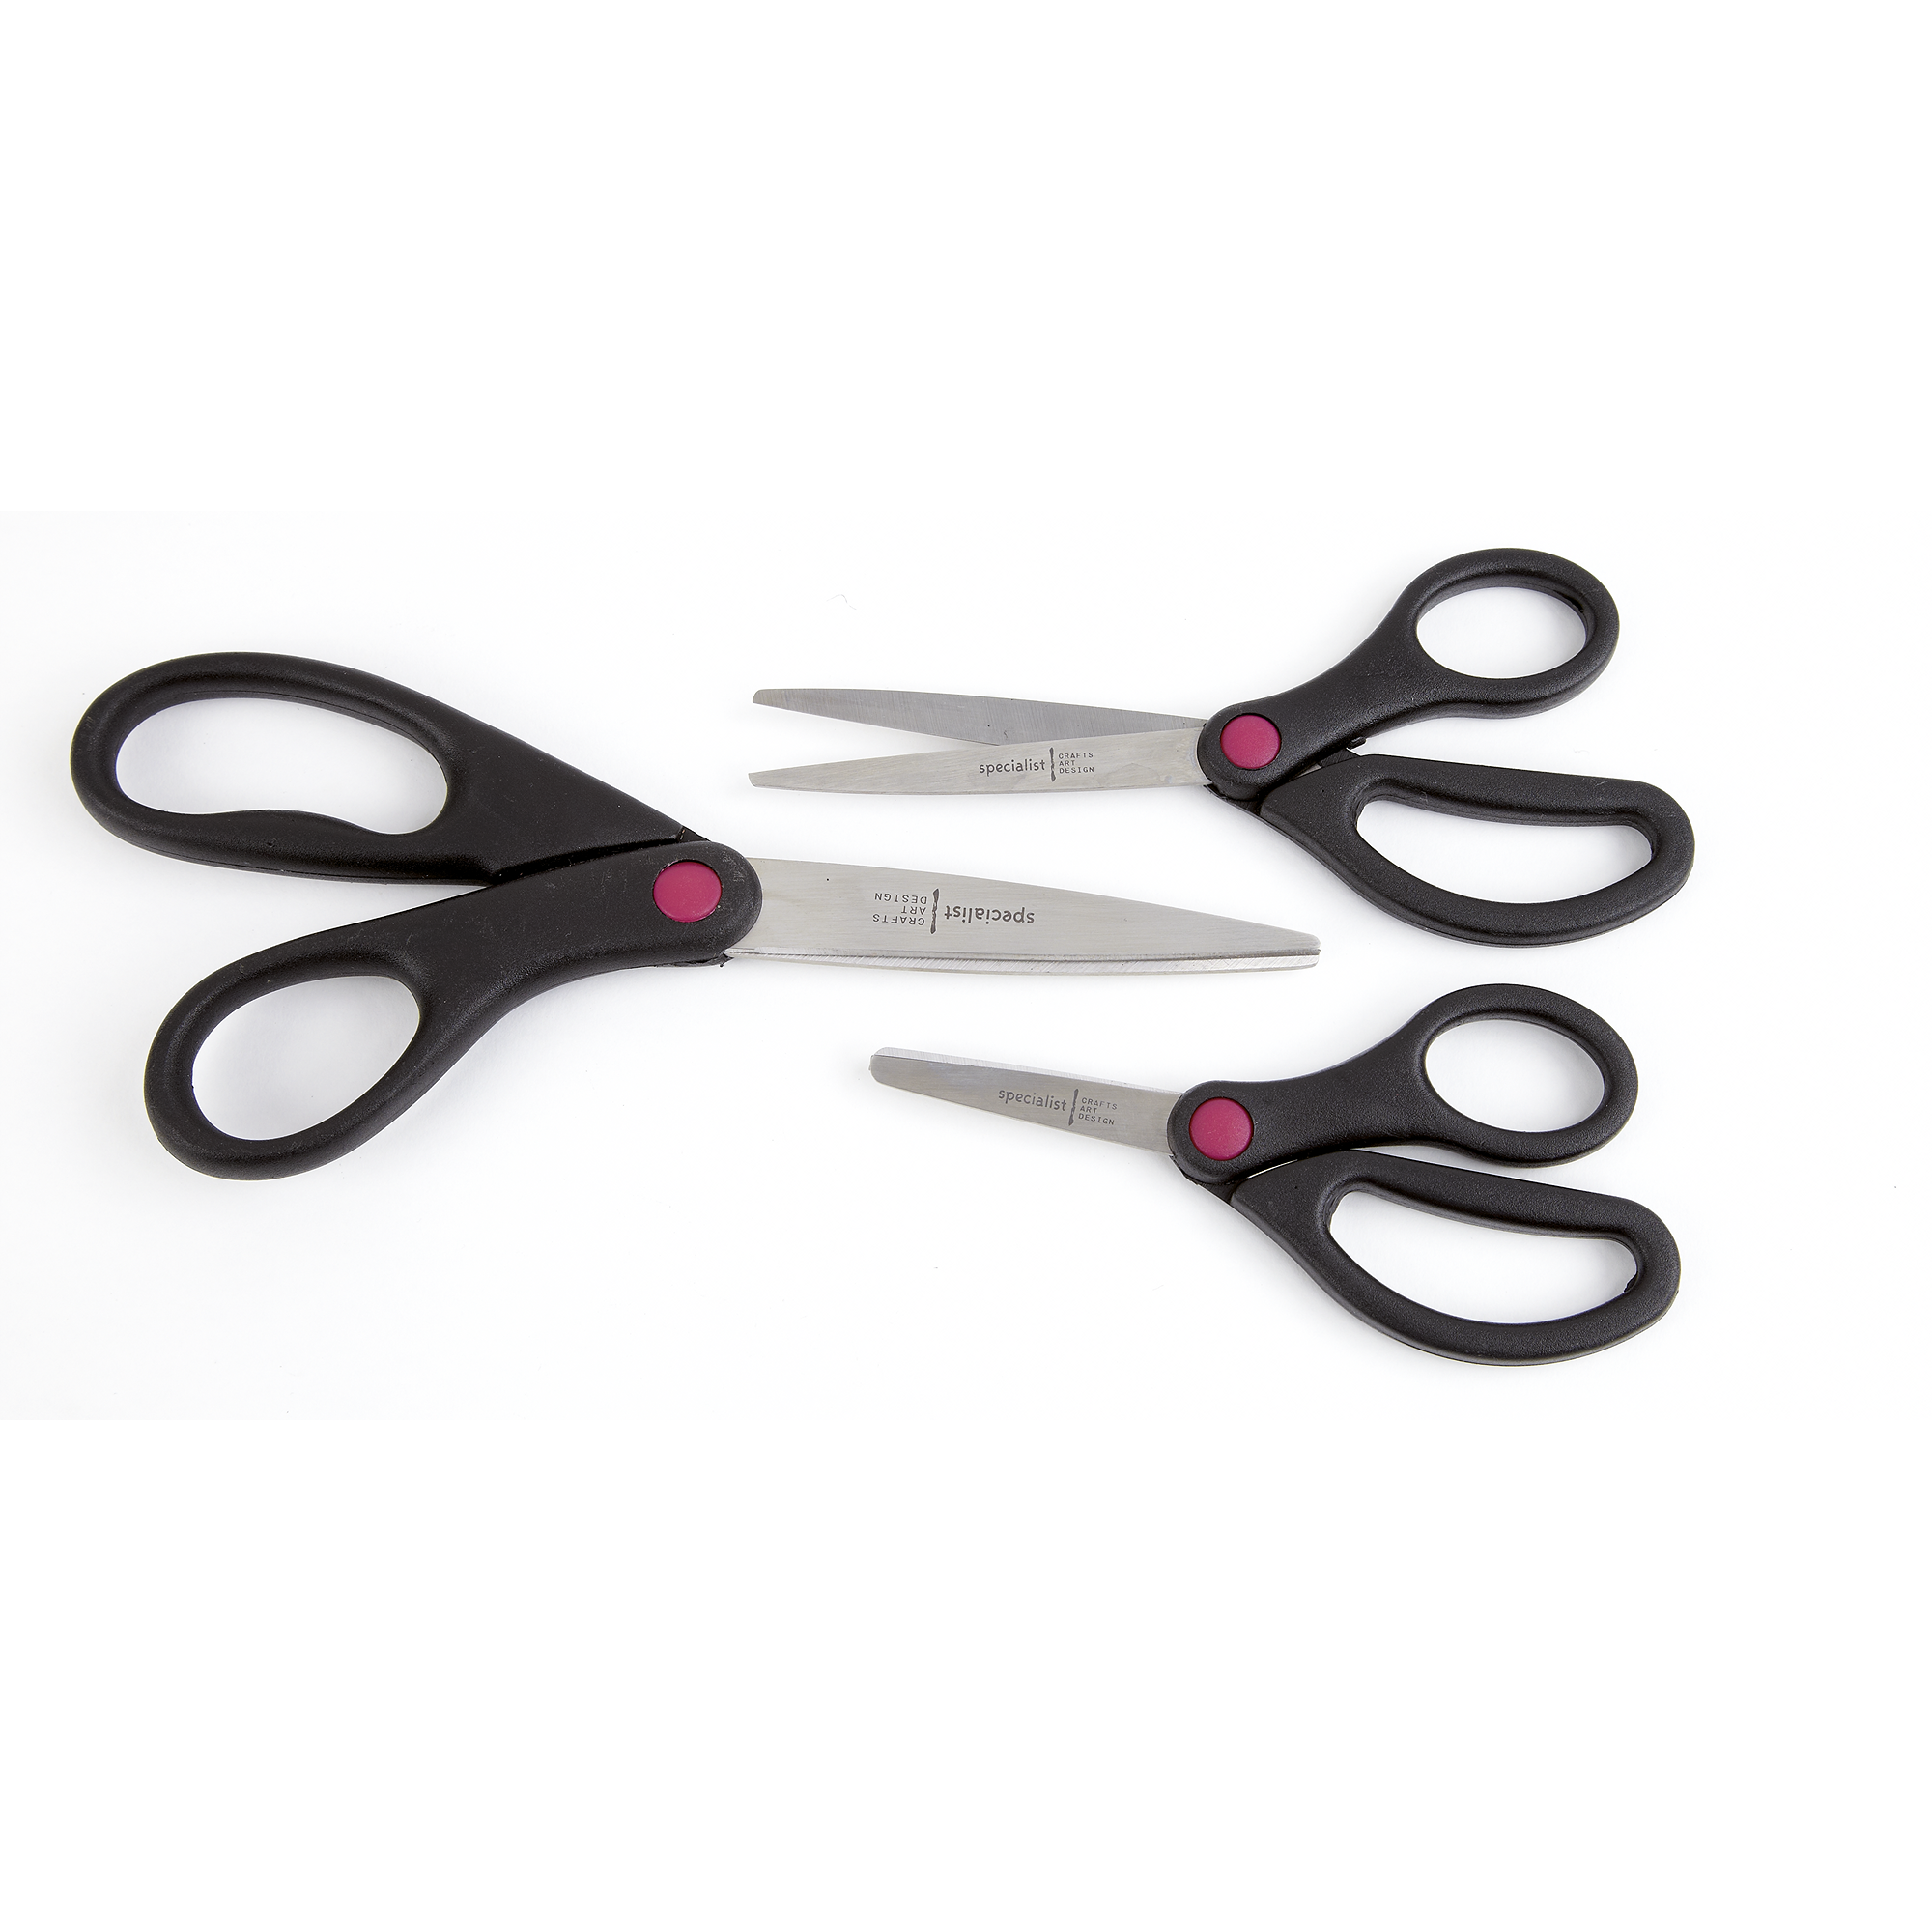 Specialist Crafts - Large Pointed Scissors